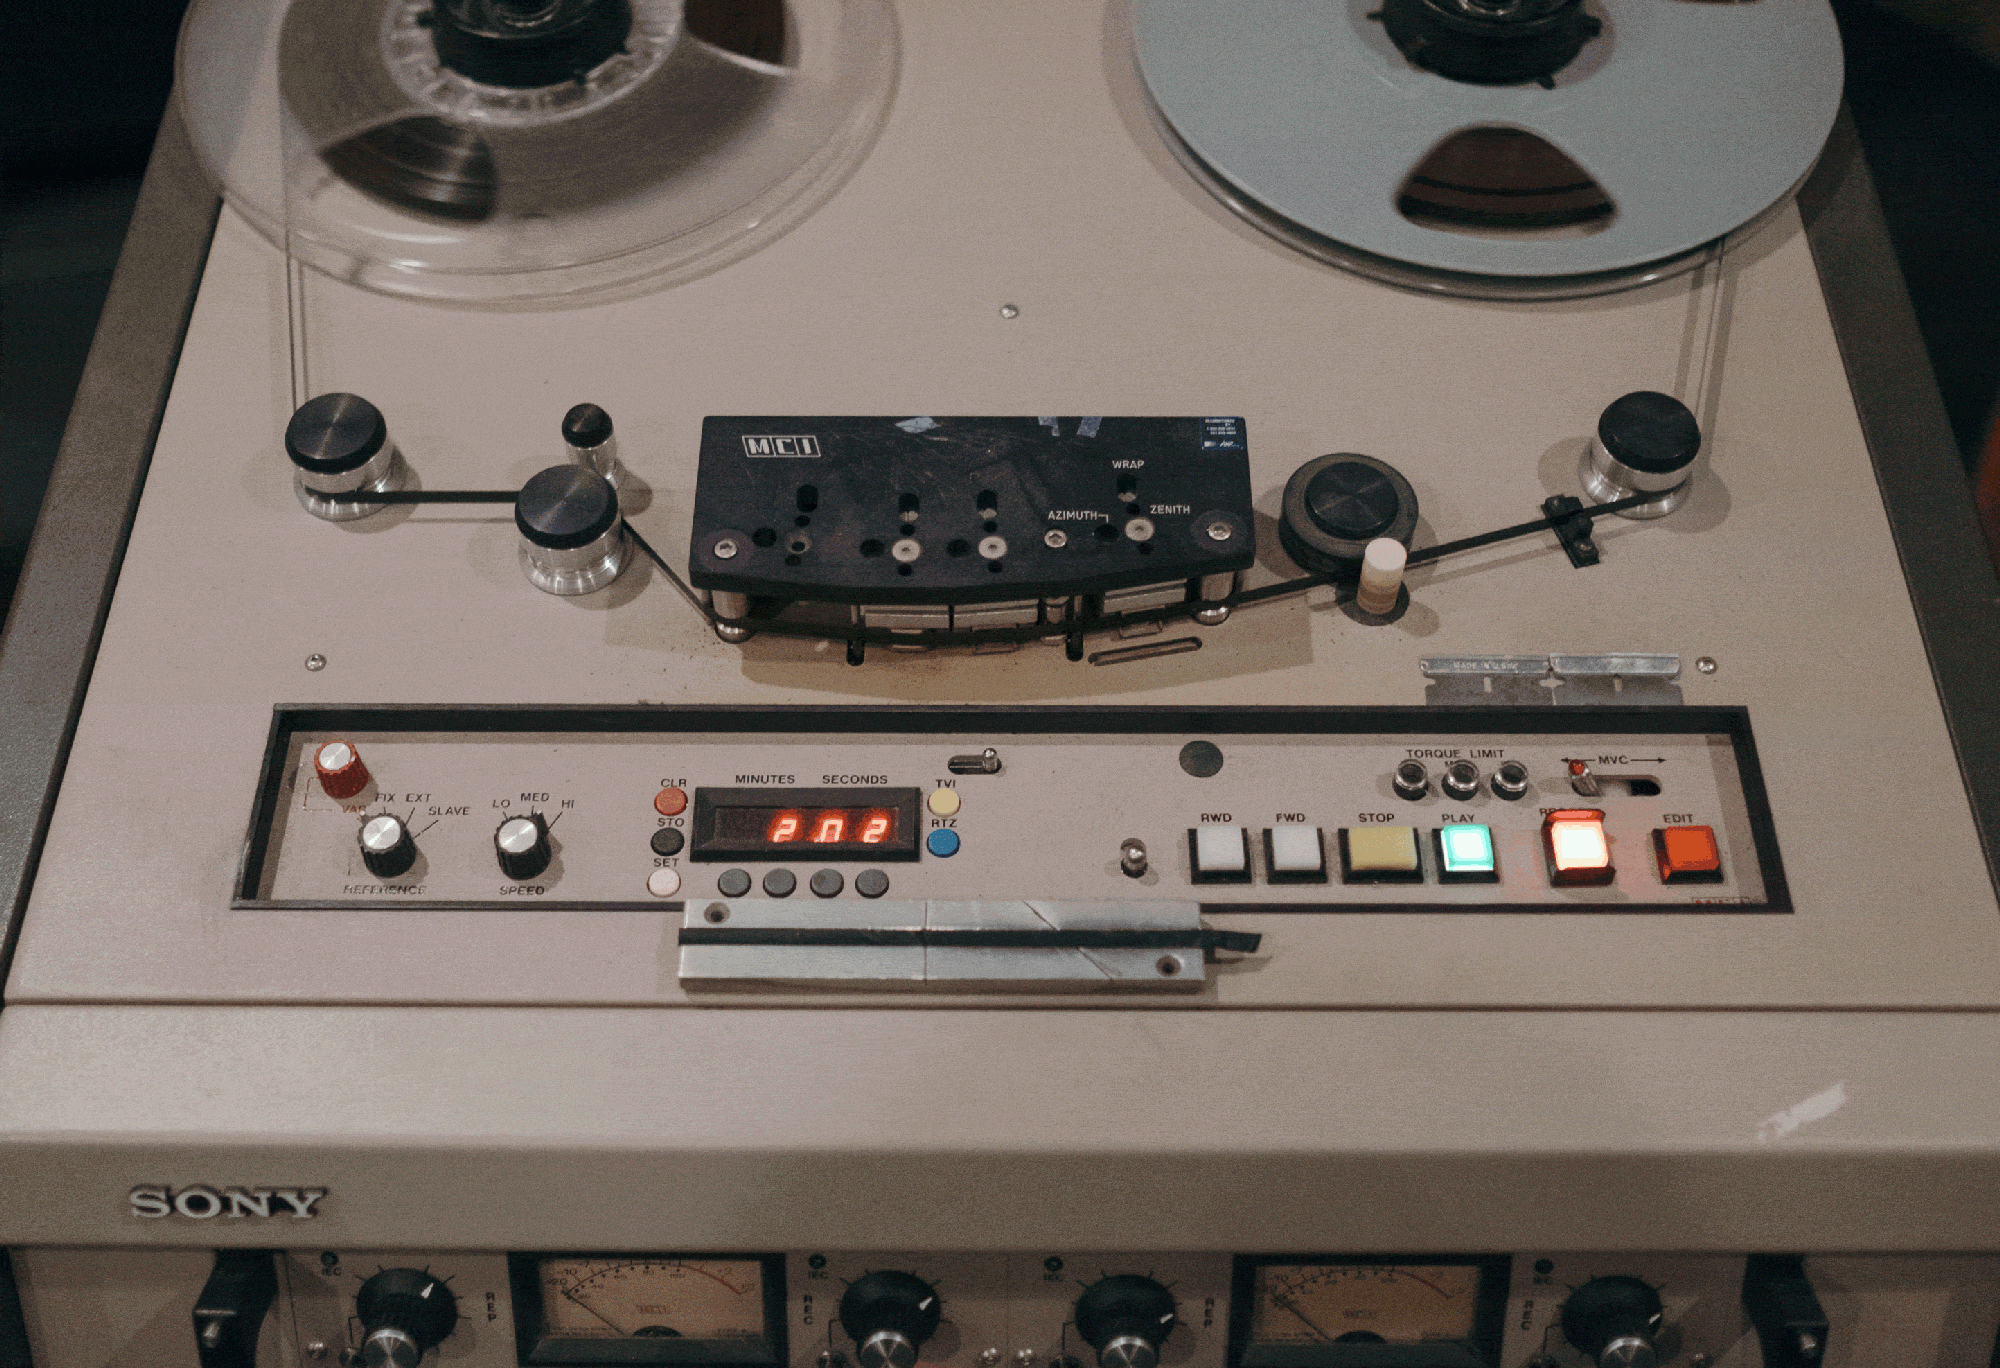 Vintage tape delay machine on display at the legendary Sugar Hill Studios based in Houston, Texas, photographed by Todd Spoth.